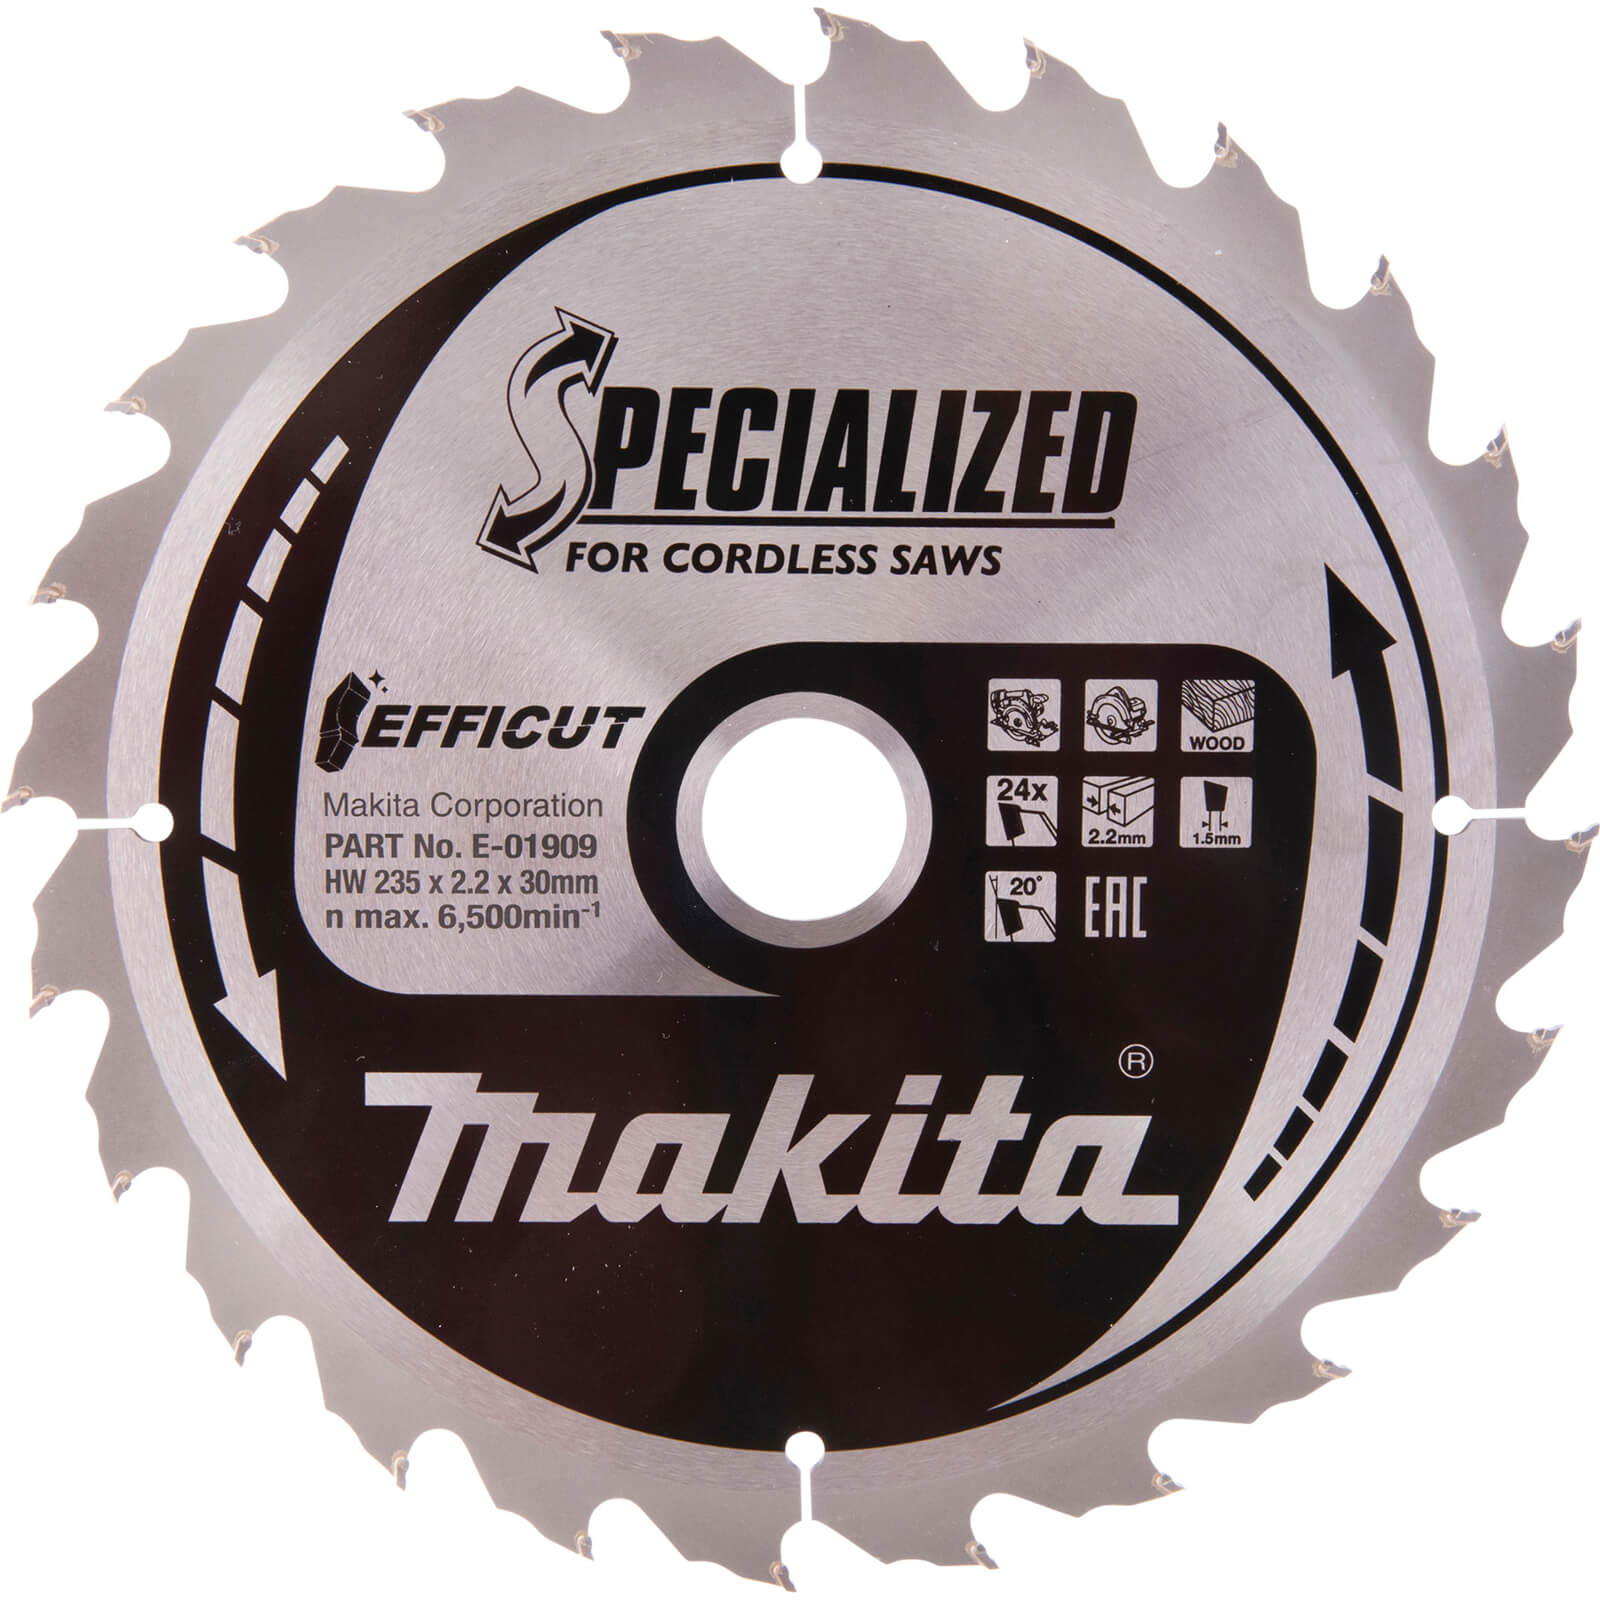 Image of Makita SPECIALIZED Efficut Wood Cutting Saw Blade 235mm 24T 30mm